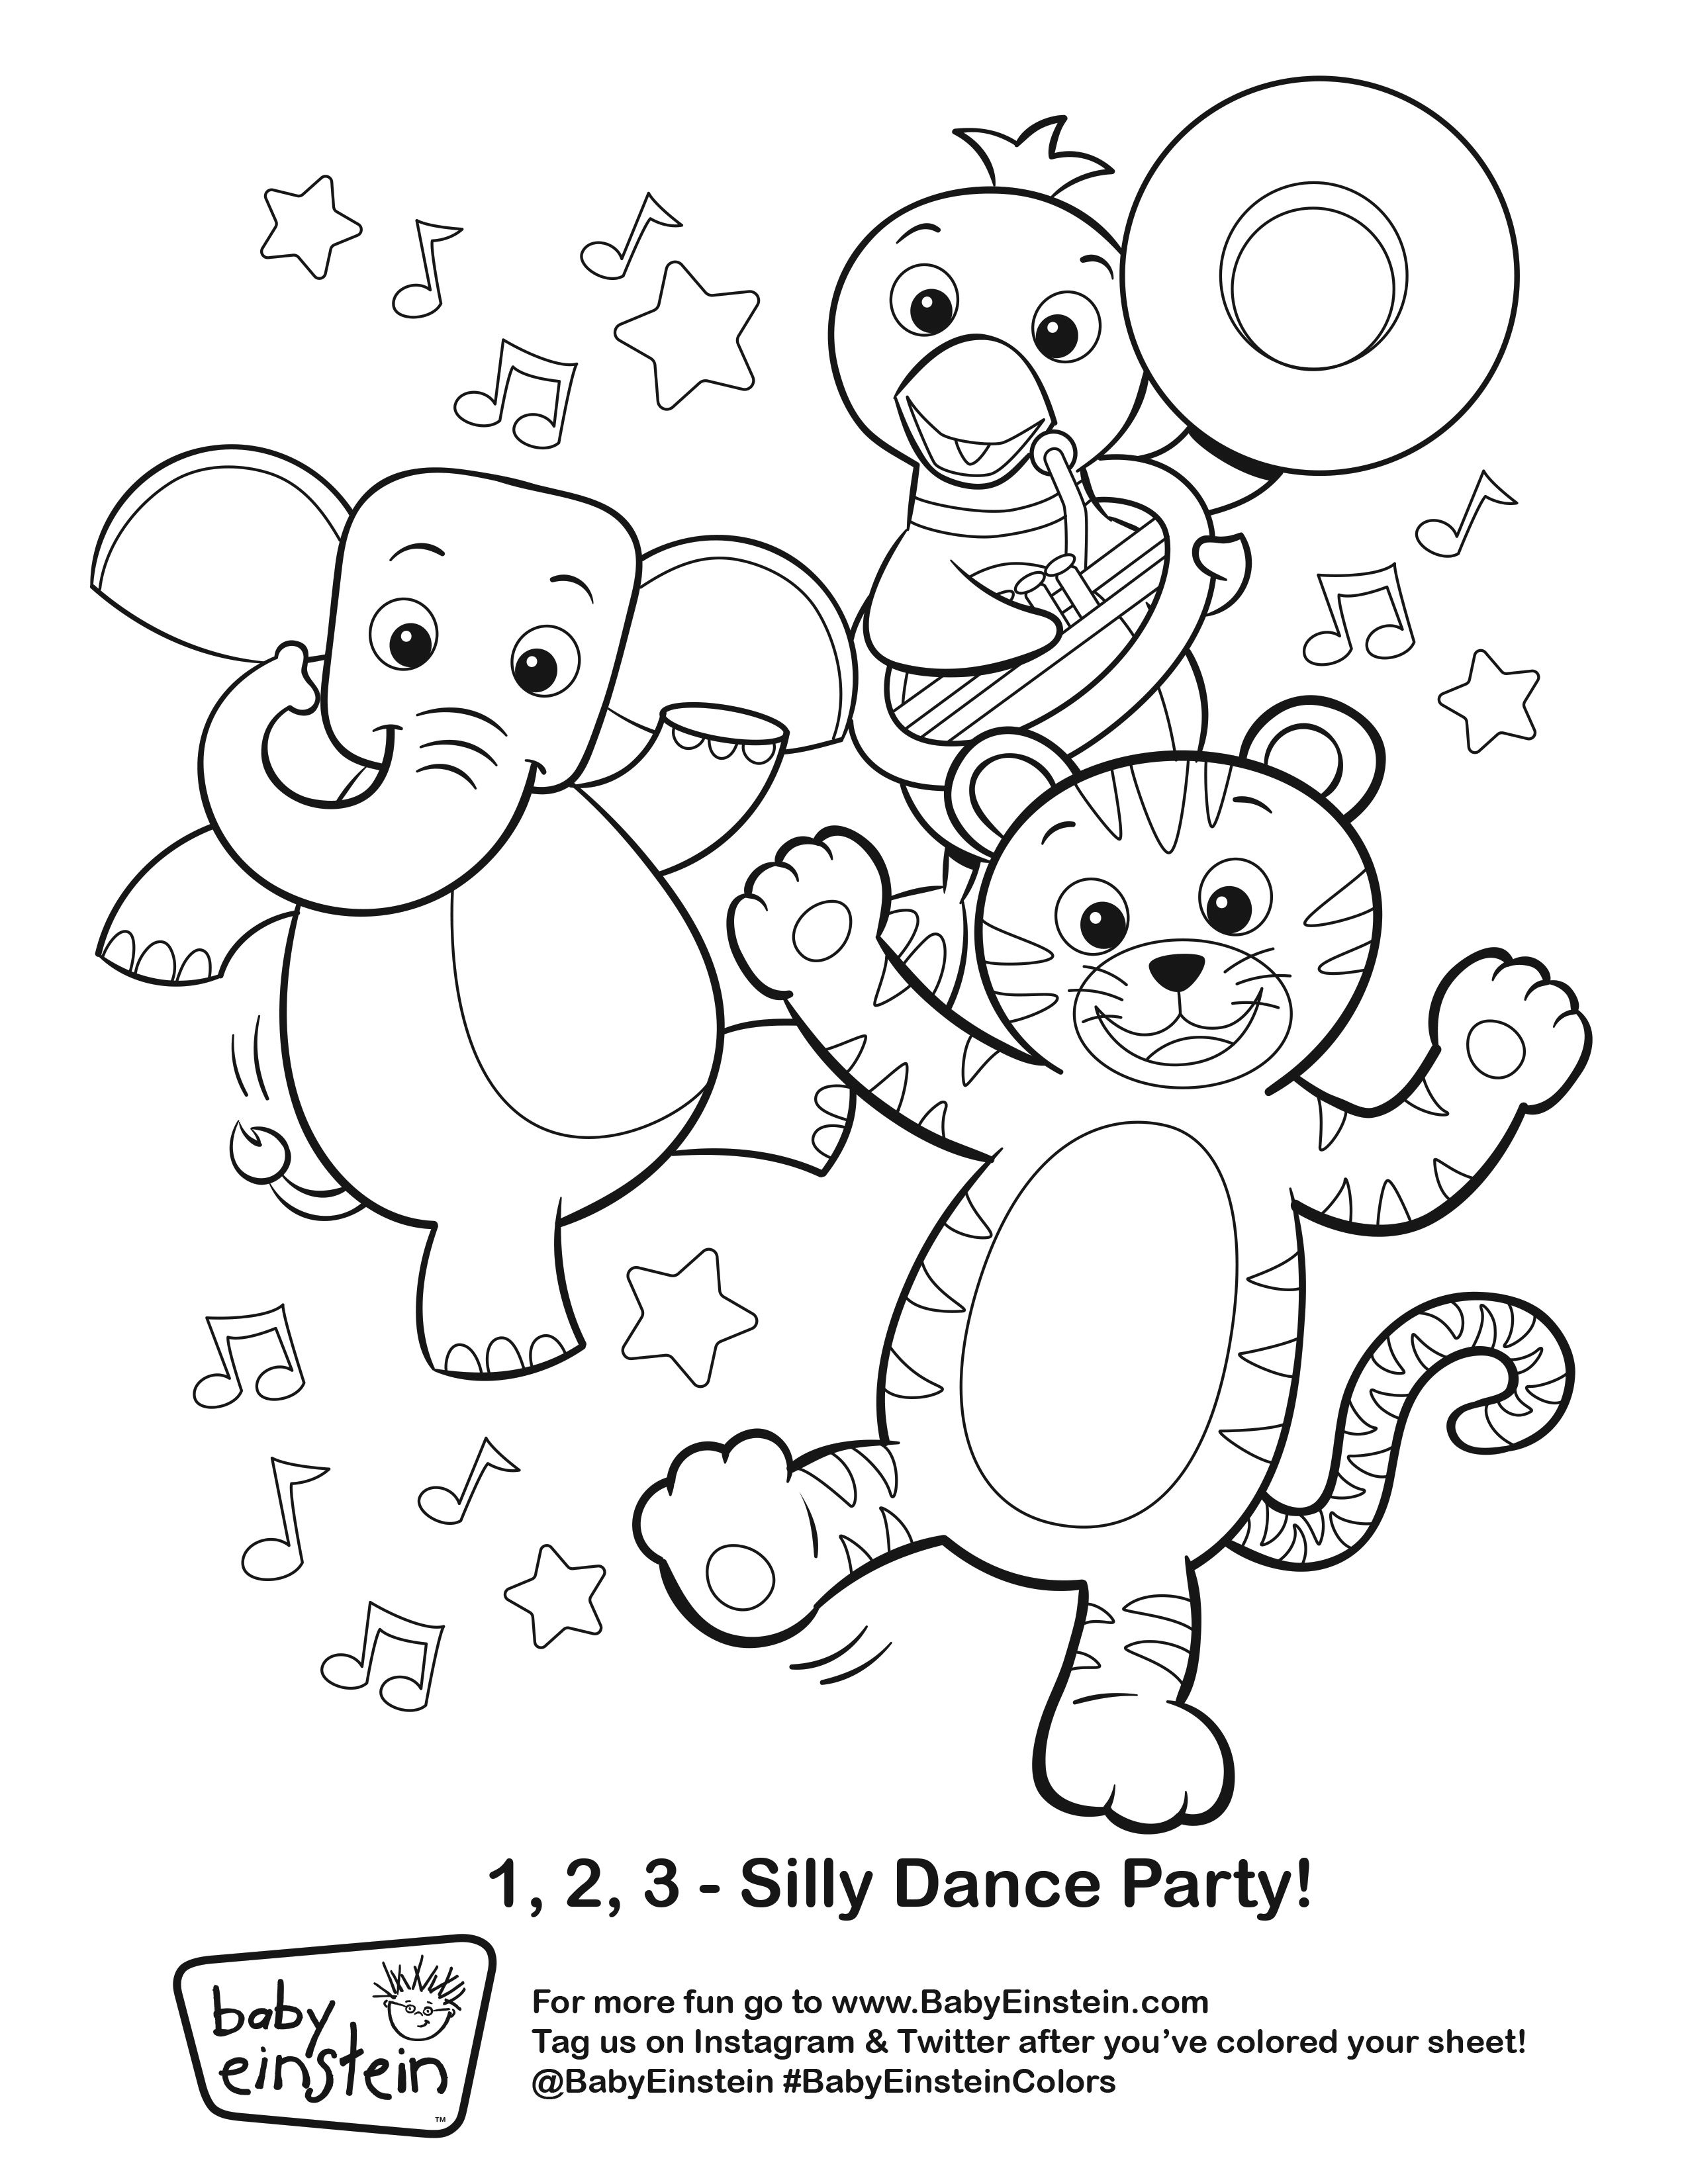 Daylight Savings Time Coloring Pages at Free